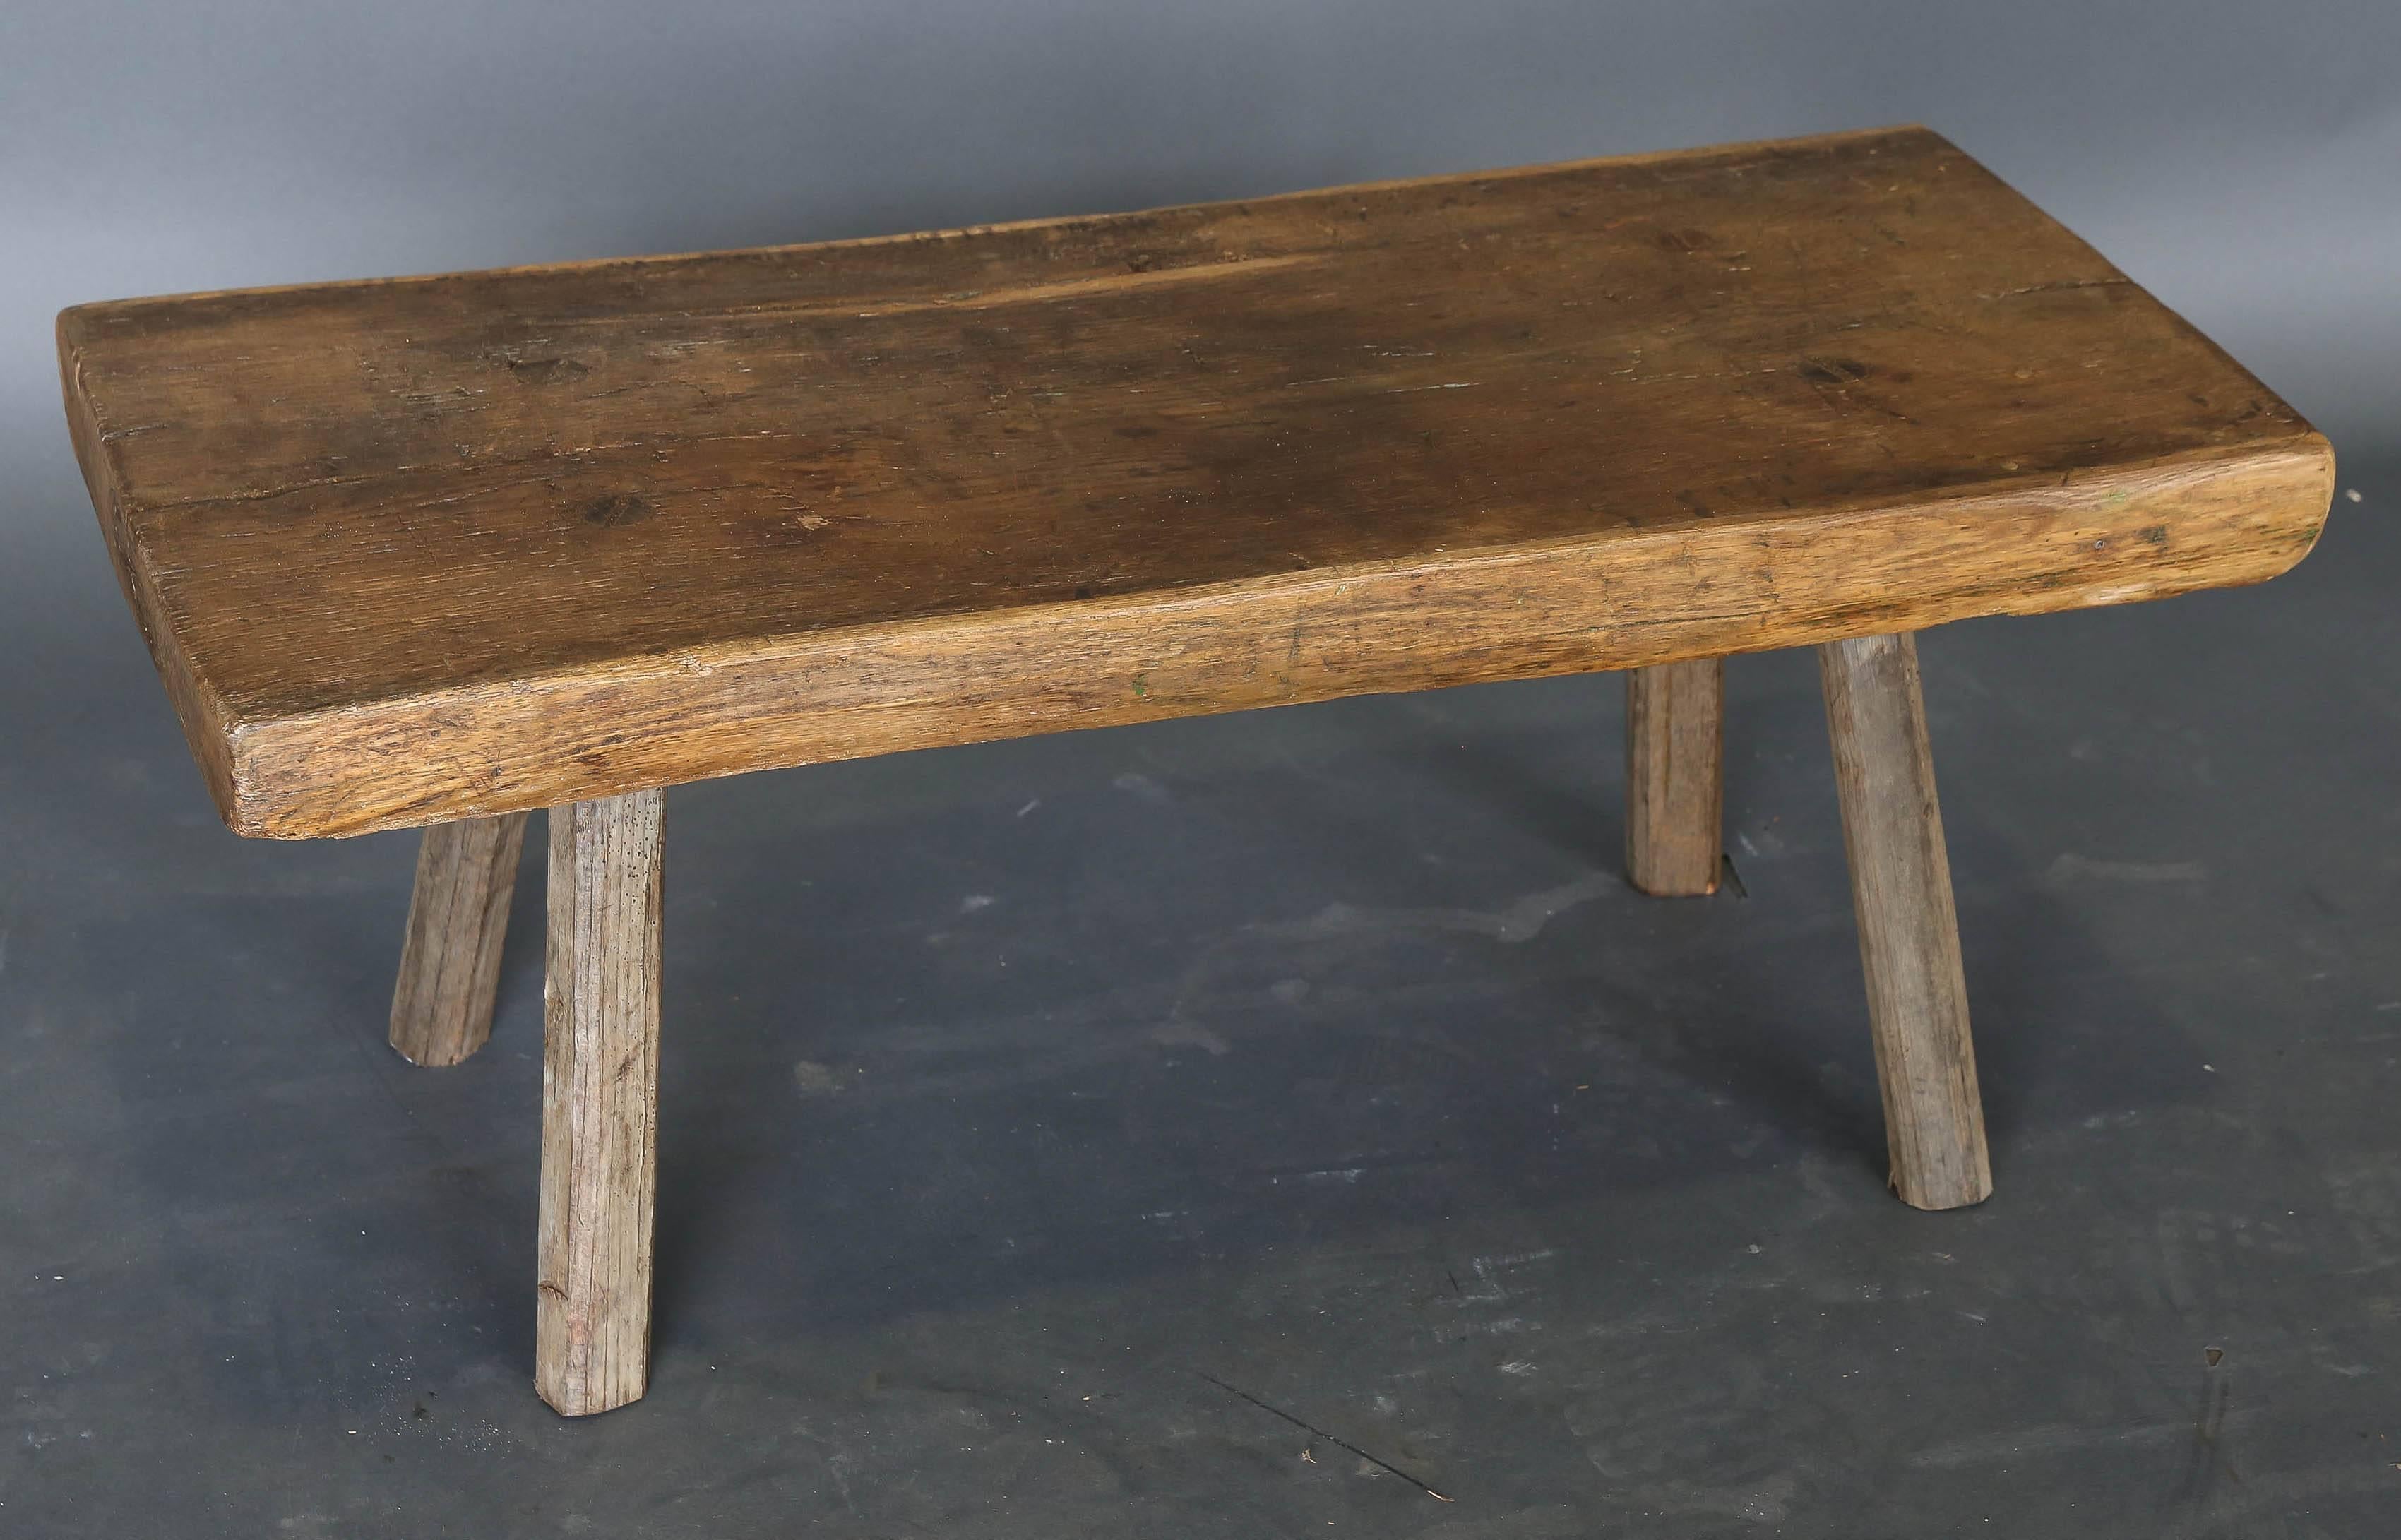 Antique 19th century elm table or bench with thick top slab on four legs. Would make great coffee table.
 